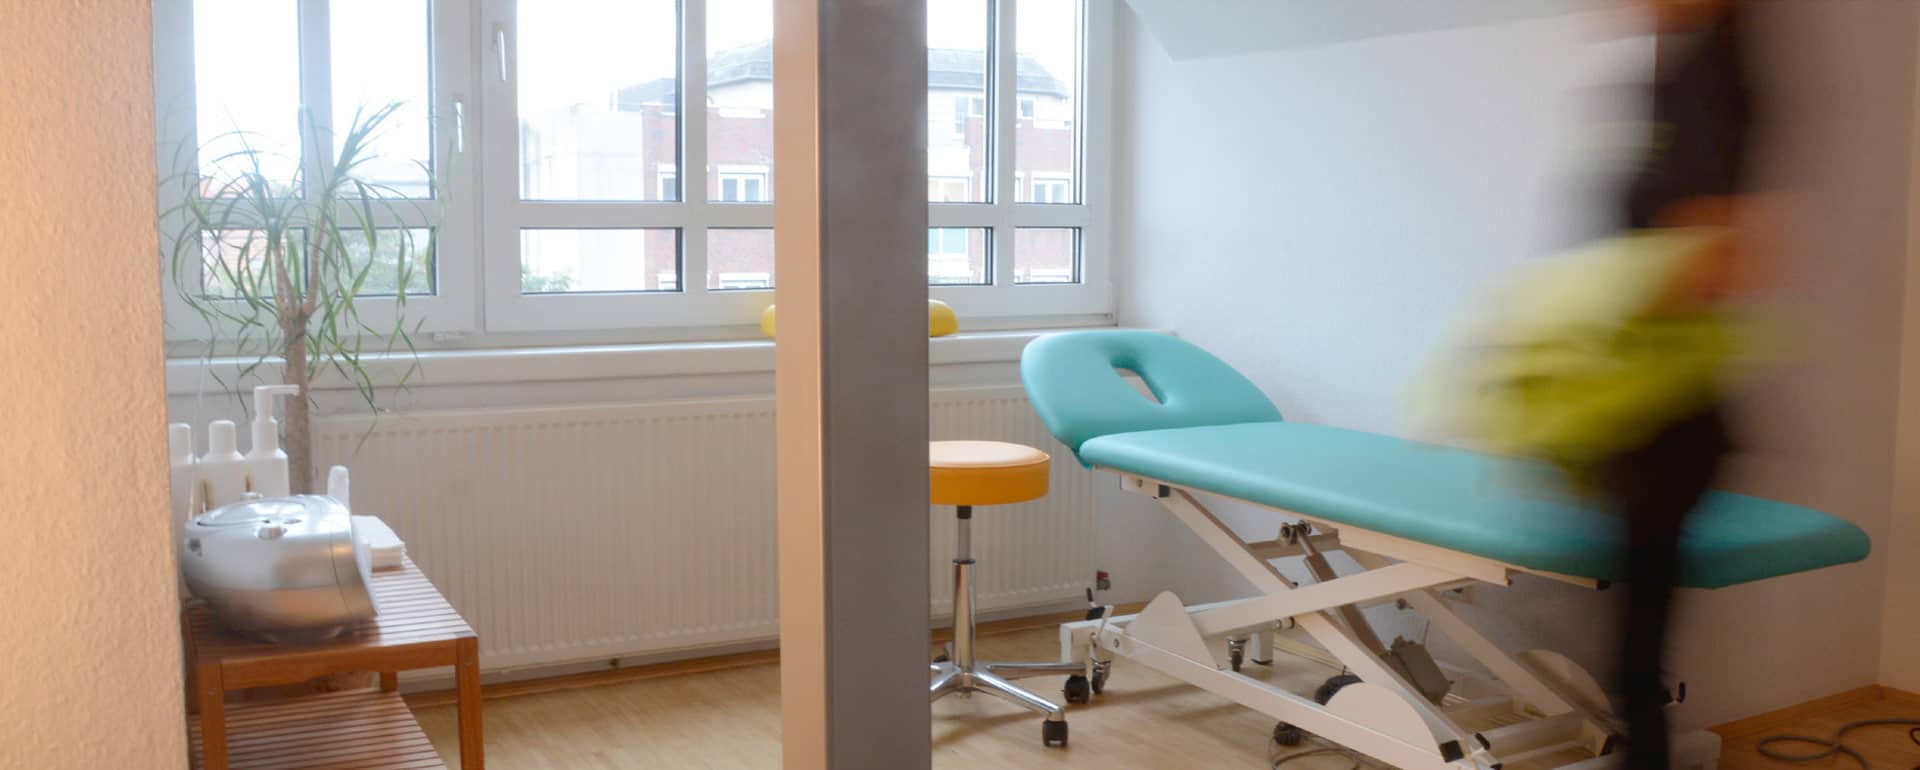 Physiotherapie Hannover 22